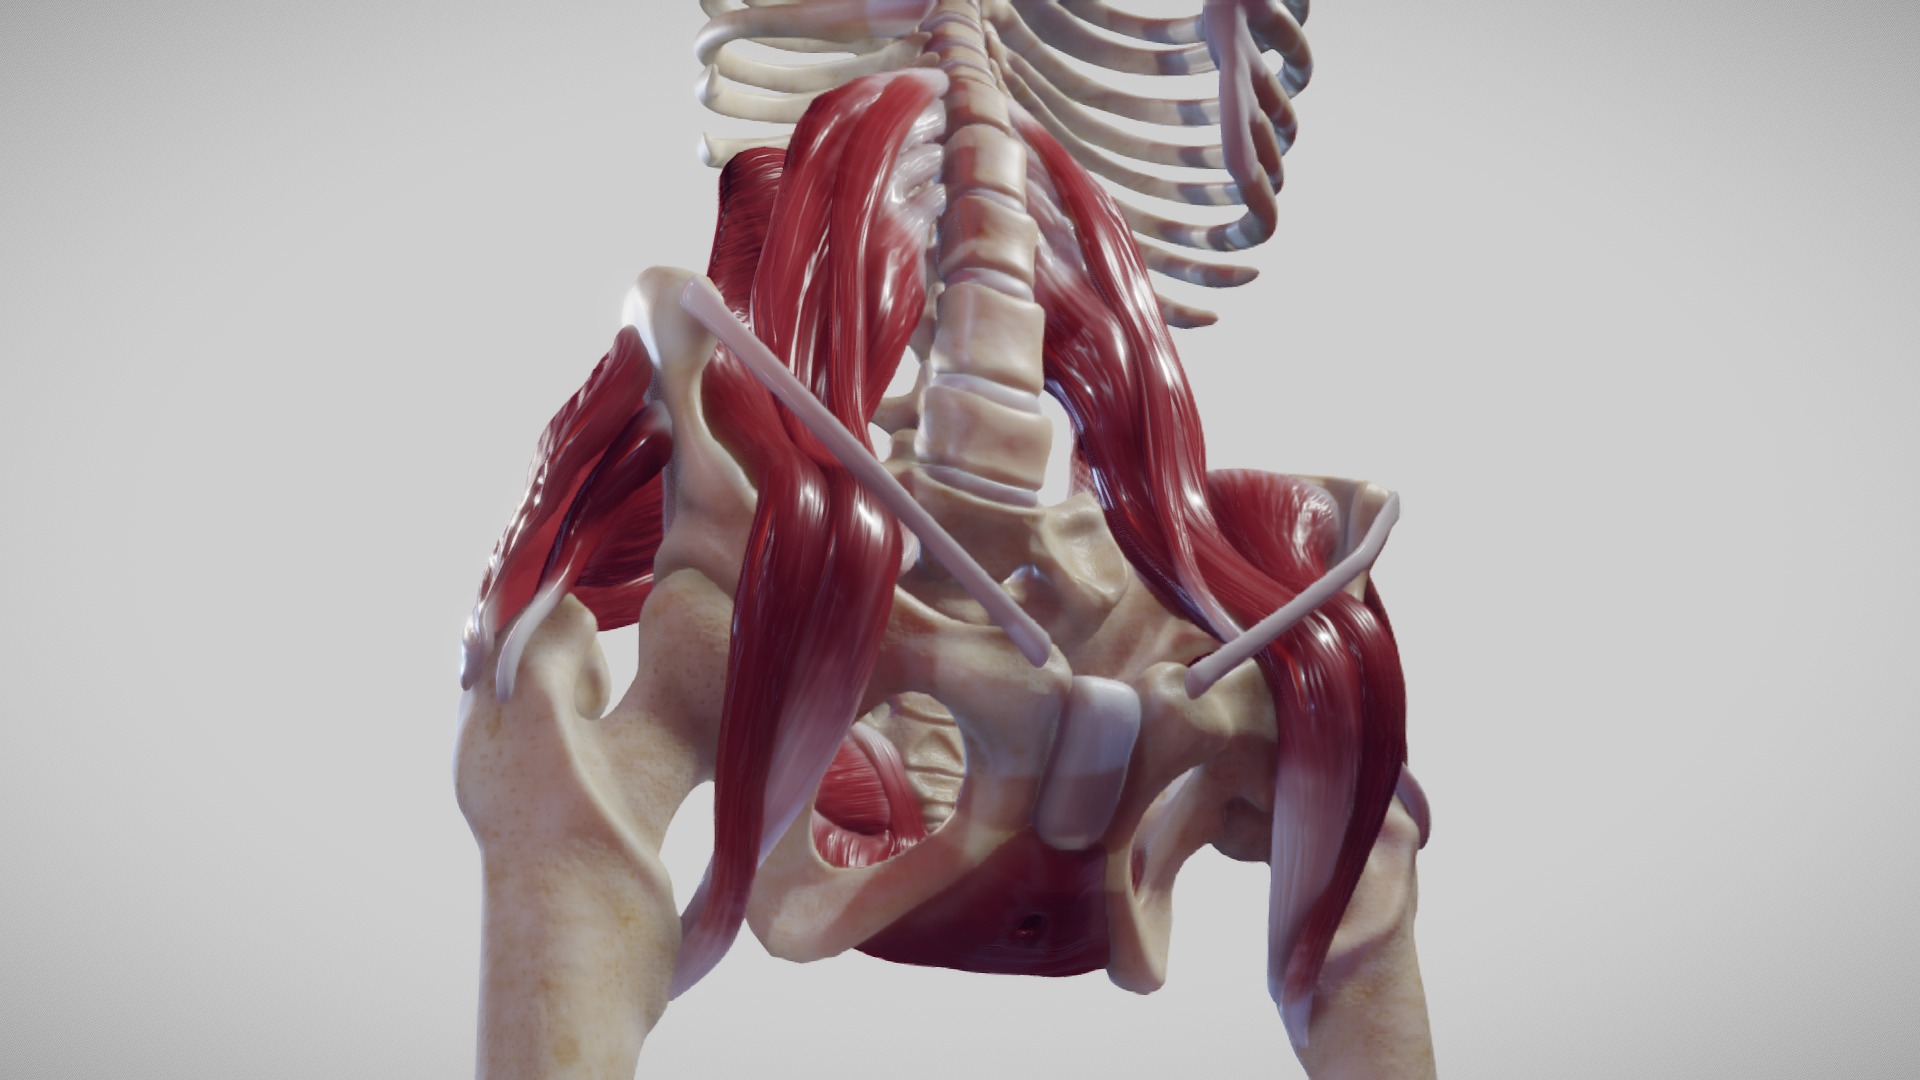 3D Anatomy of the Abdomen, Lower Back, and Pelvis Muscles